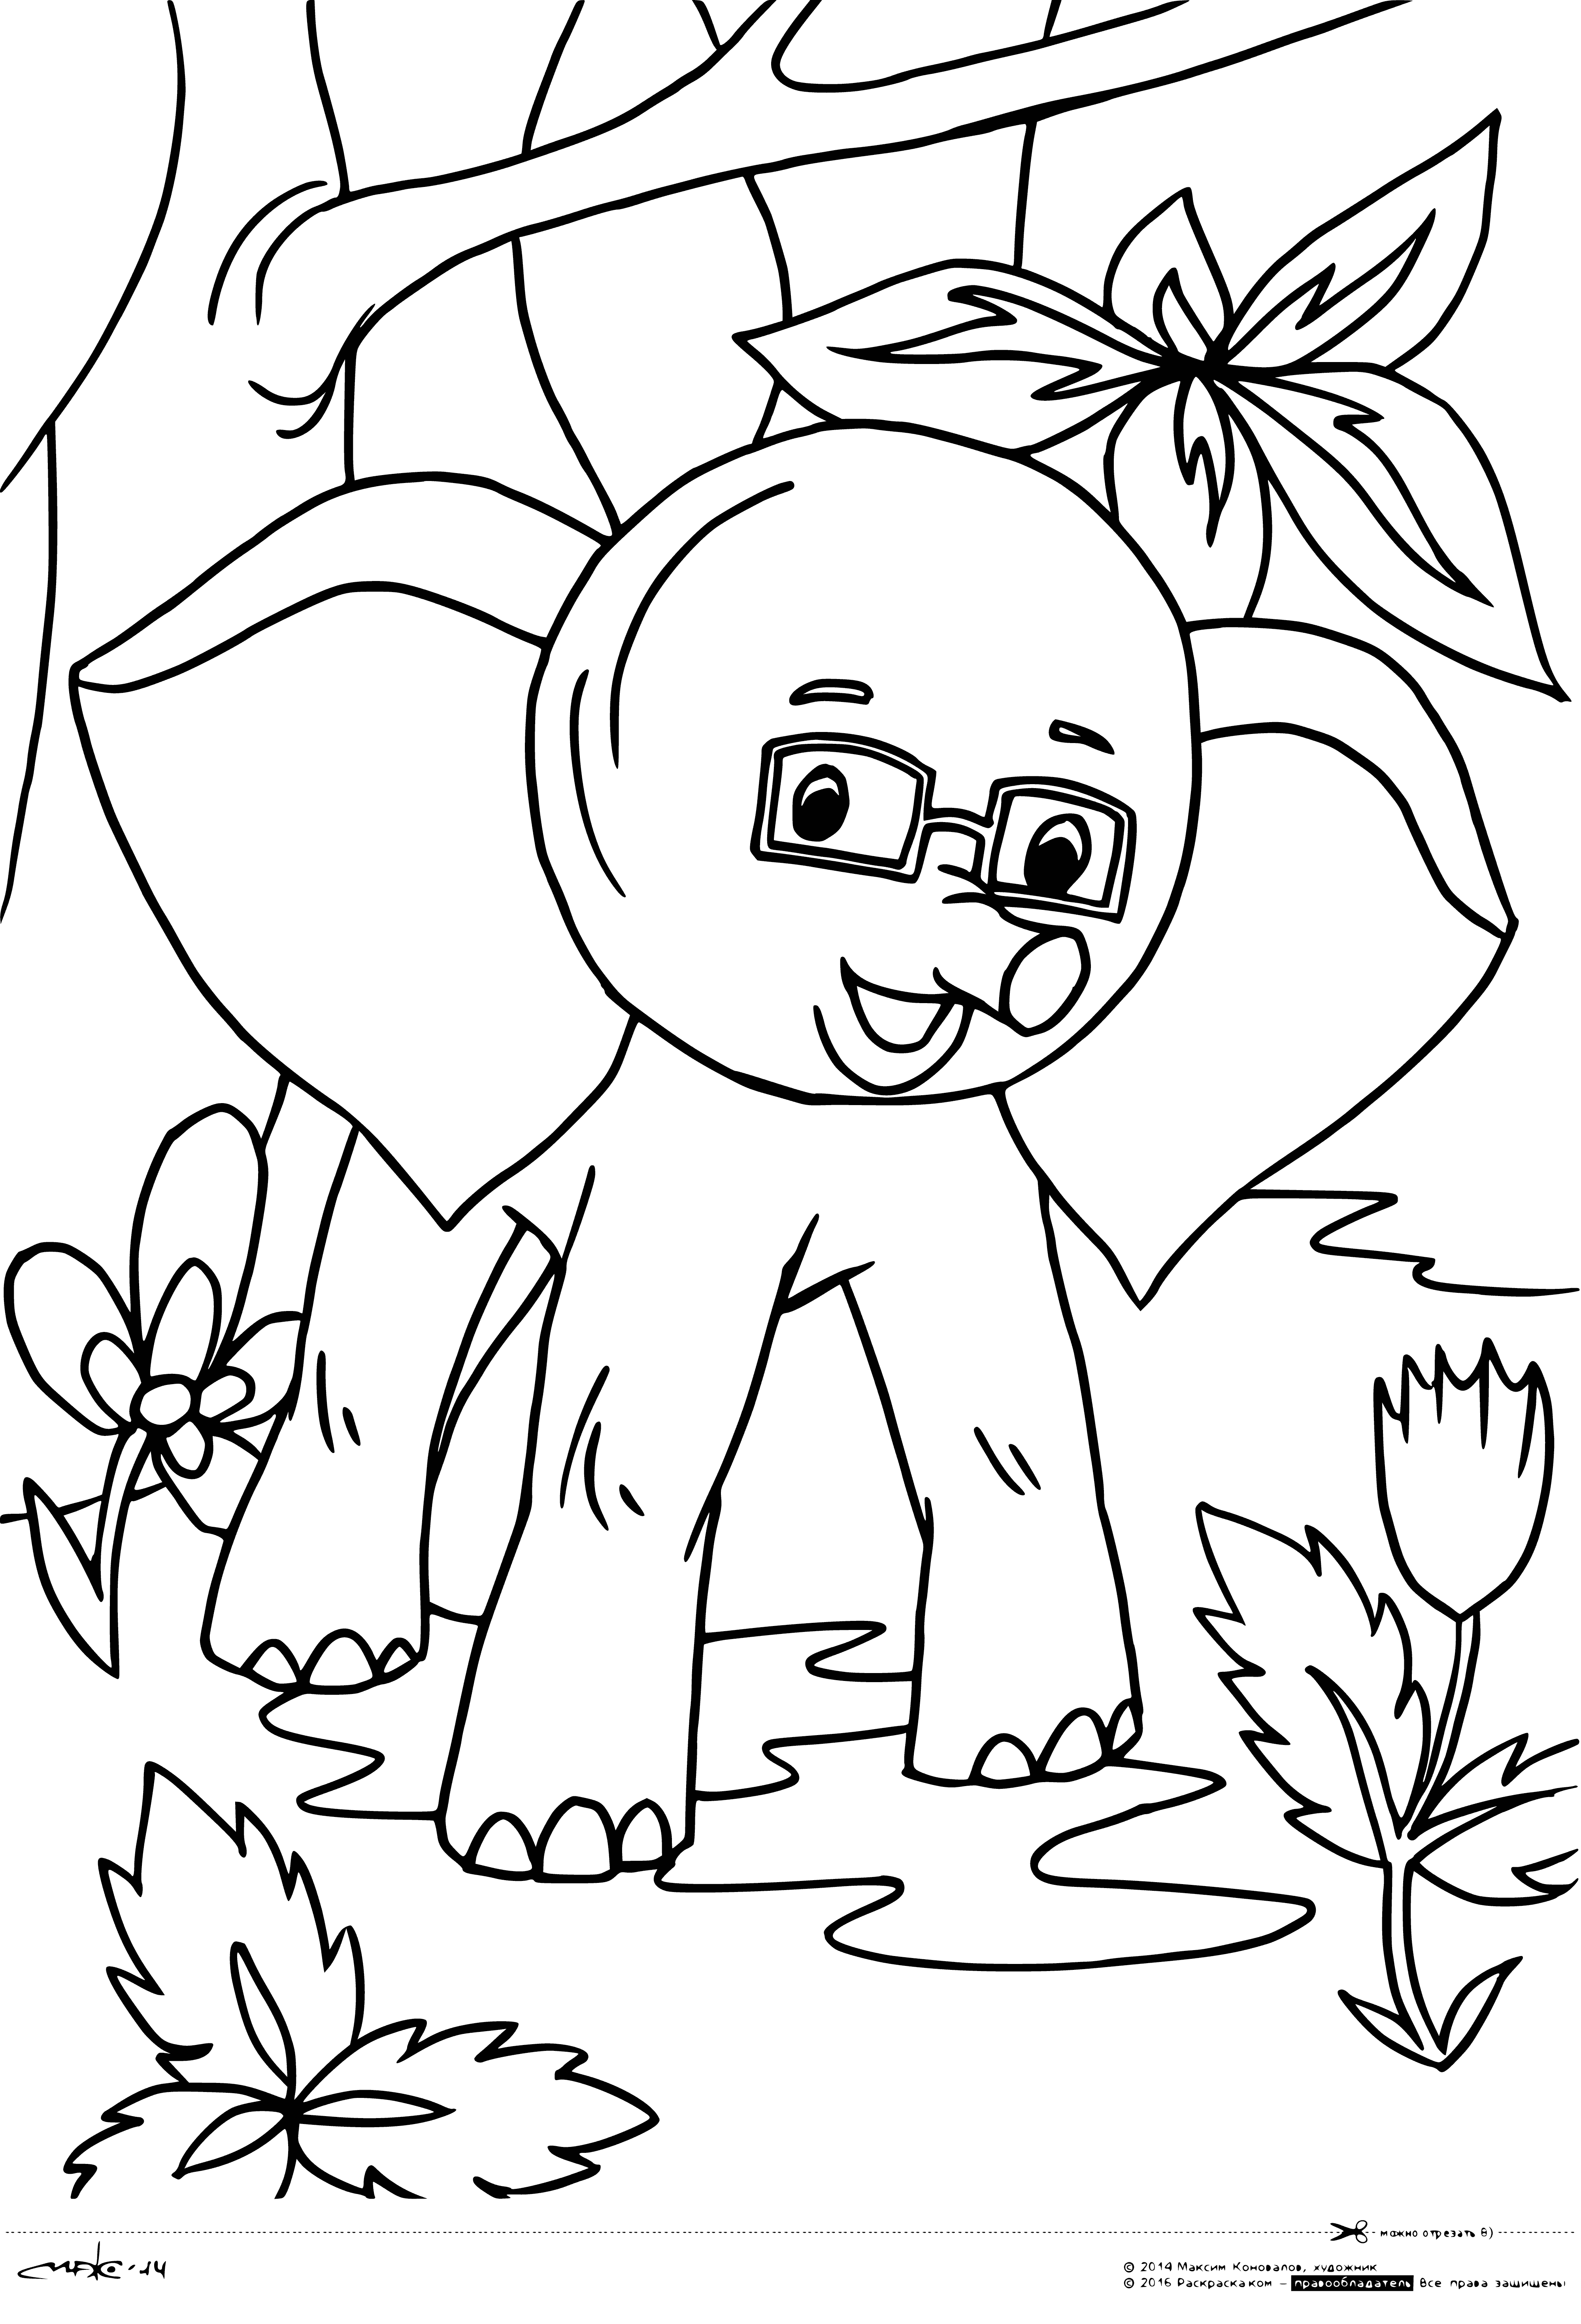 coloring page: 38 parrots perch on a gray baby elephant's back in a coloring page. They have a mix of colorful green, blue & orange feathers & some are on one leg.